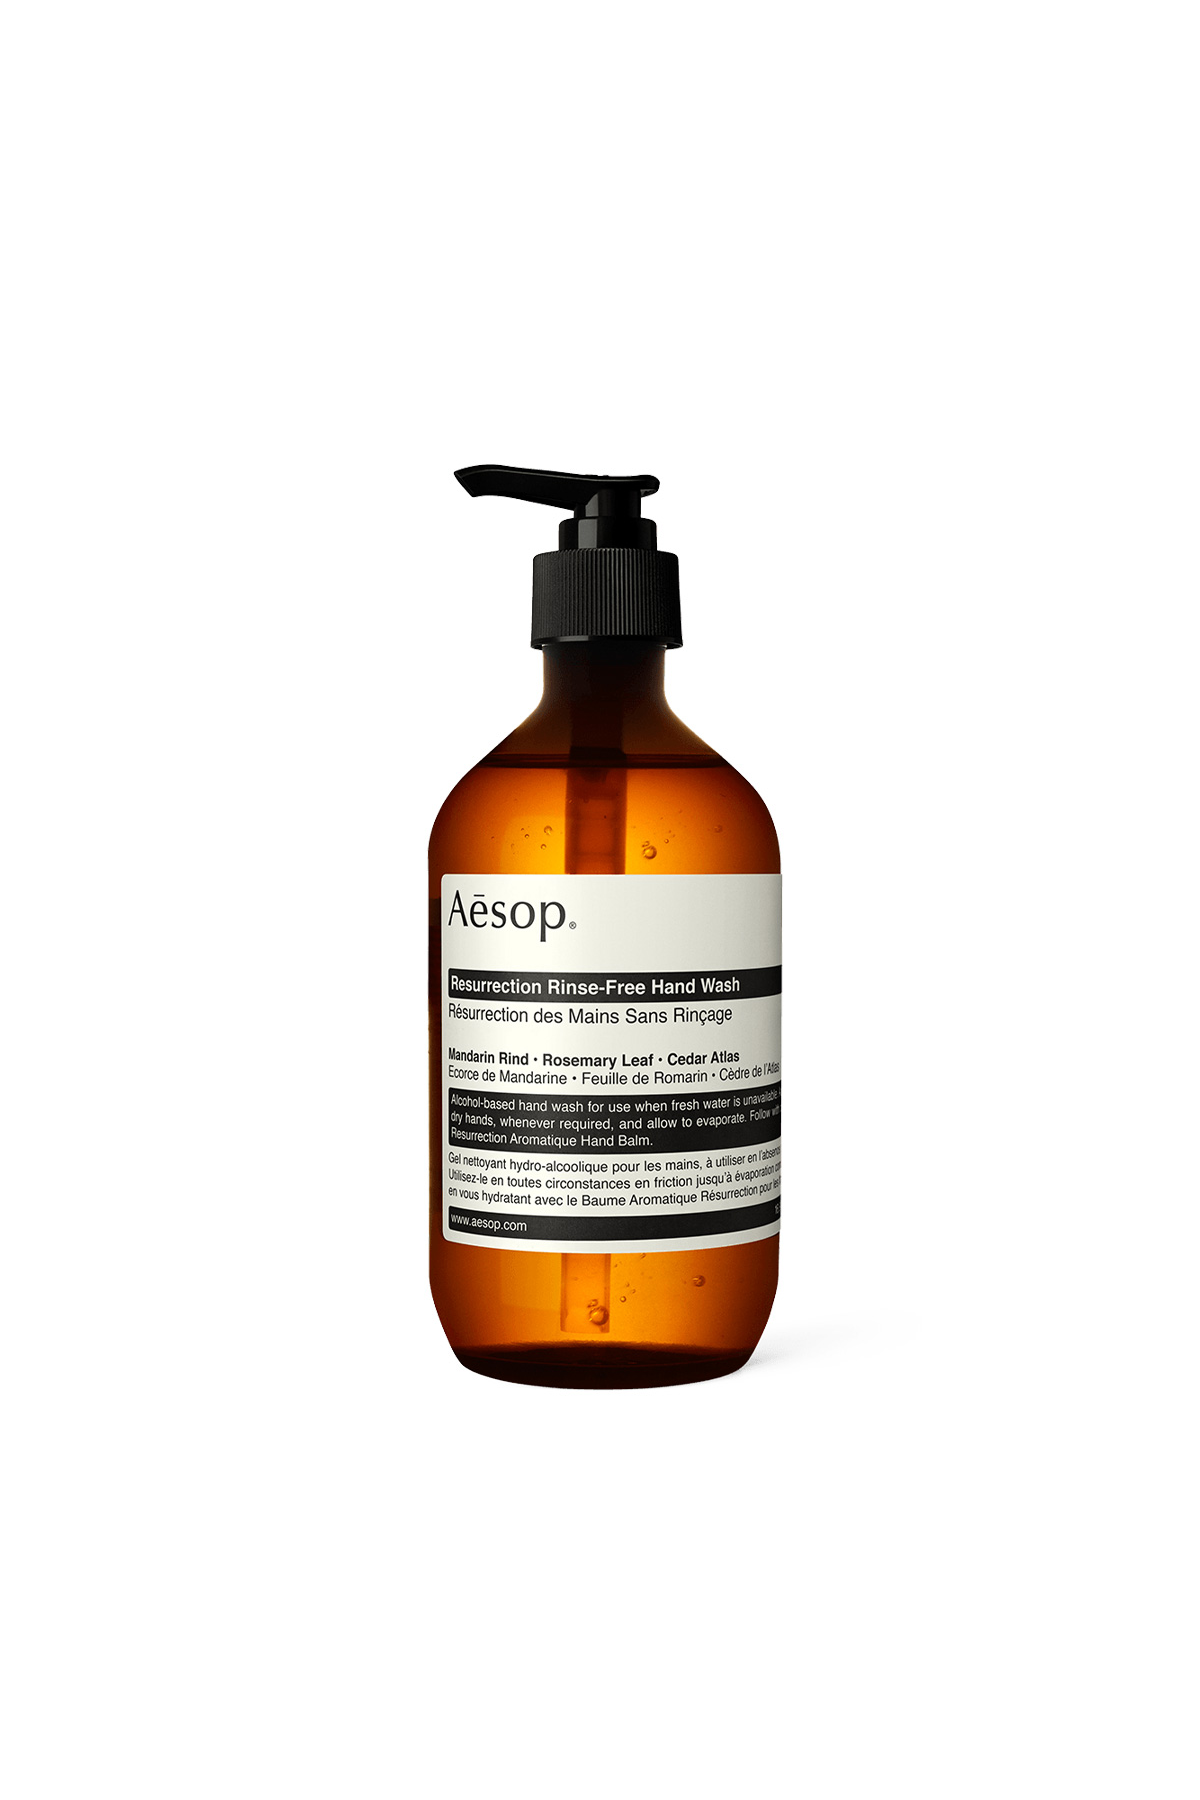 Product_Aesop1.png